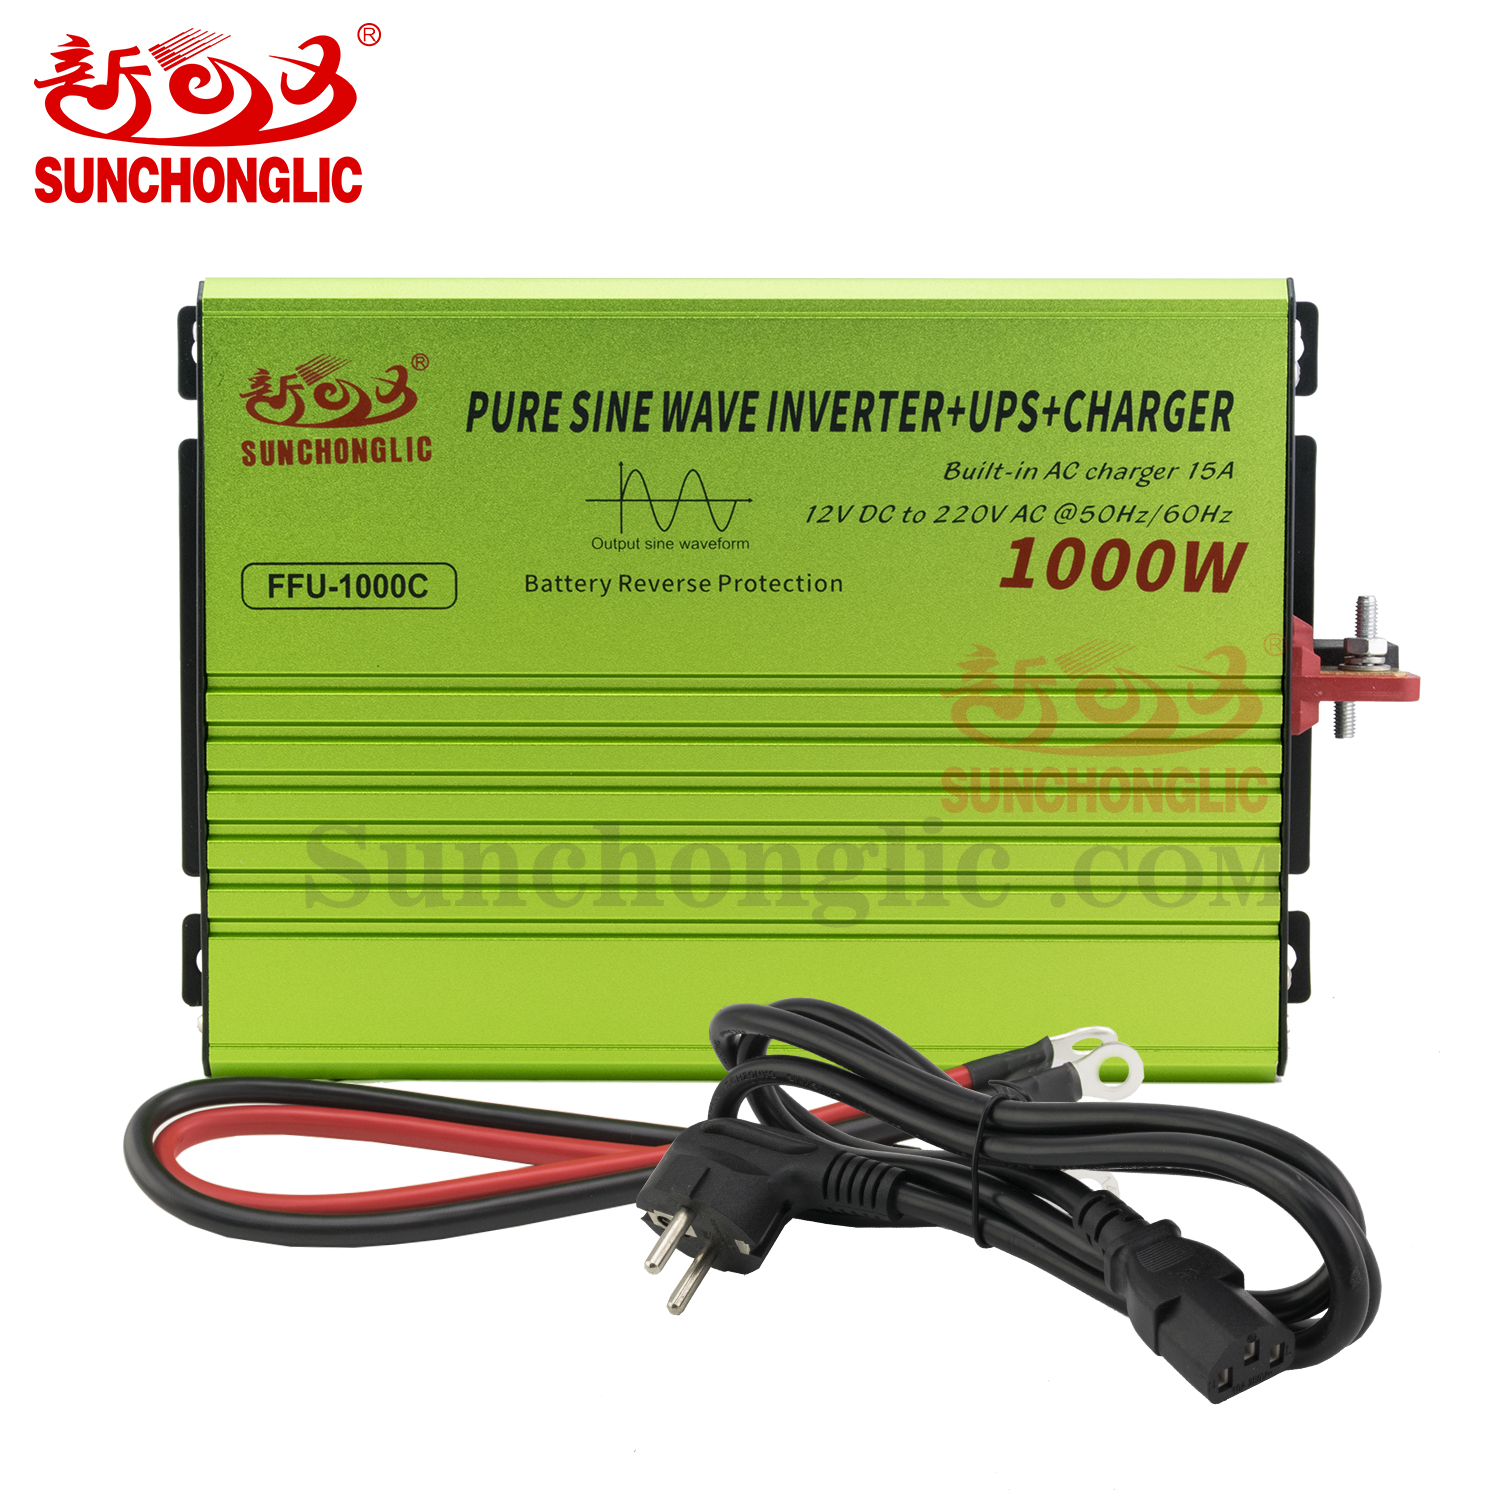 Sunchonglic 1000w 12V 220V pure sine wave inverter UPS 1KW with 15A AC charger 